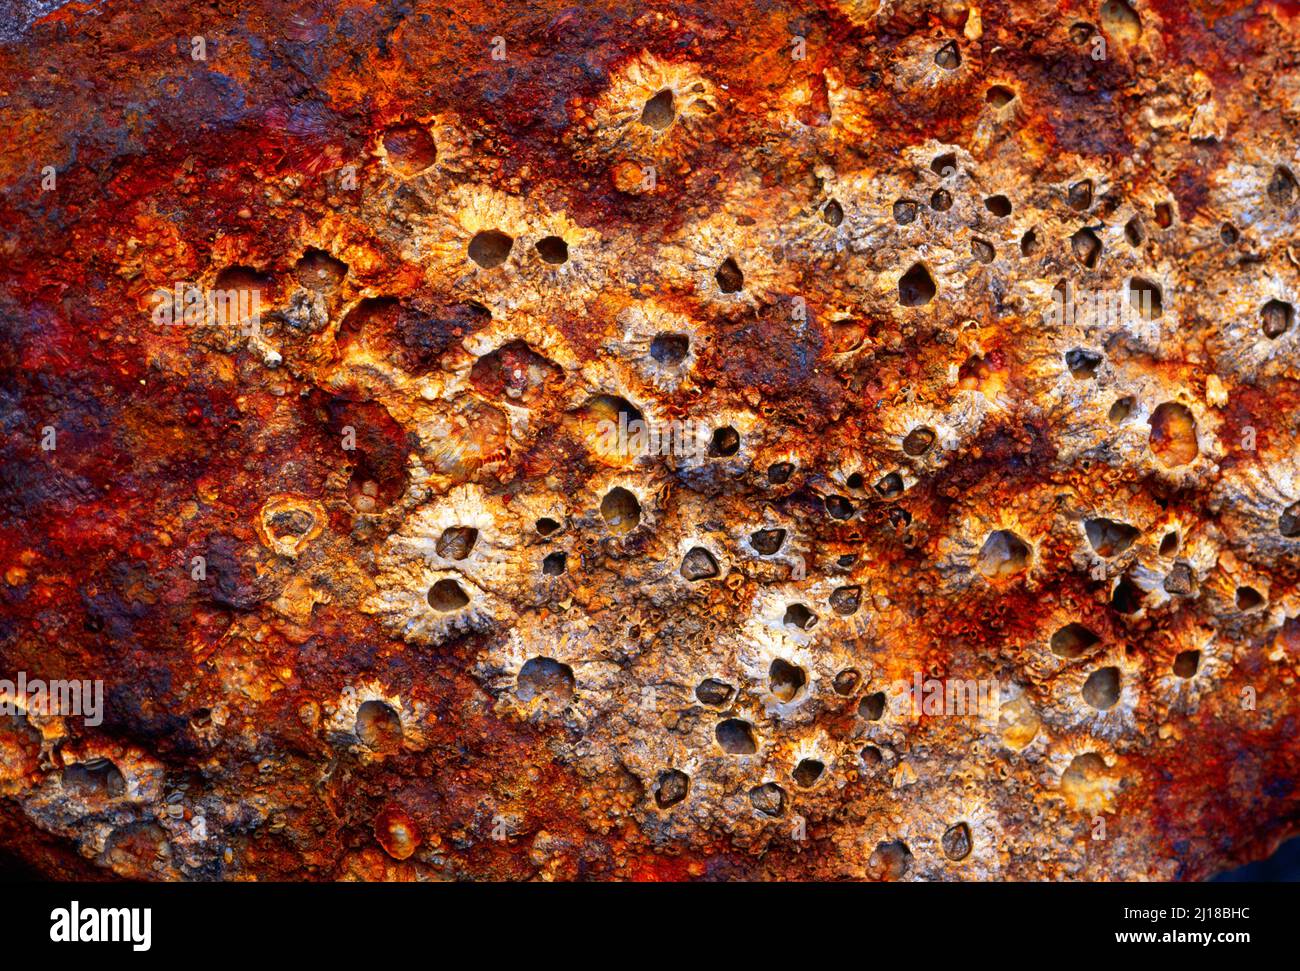 barnacles on rusty anchor, Stock Photo